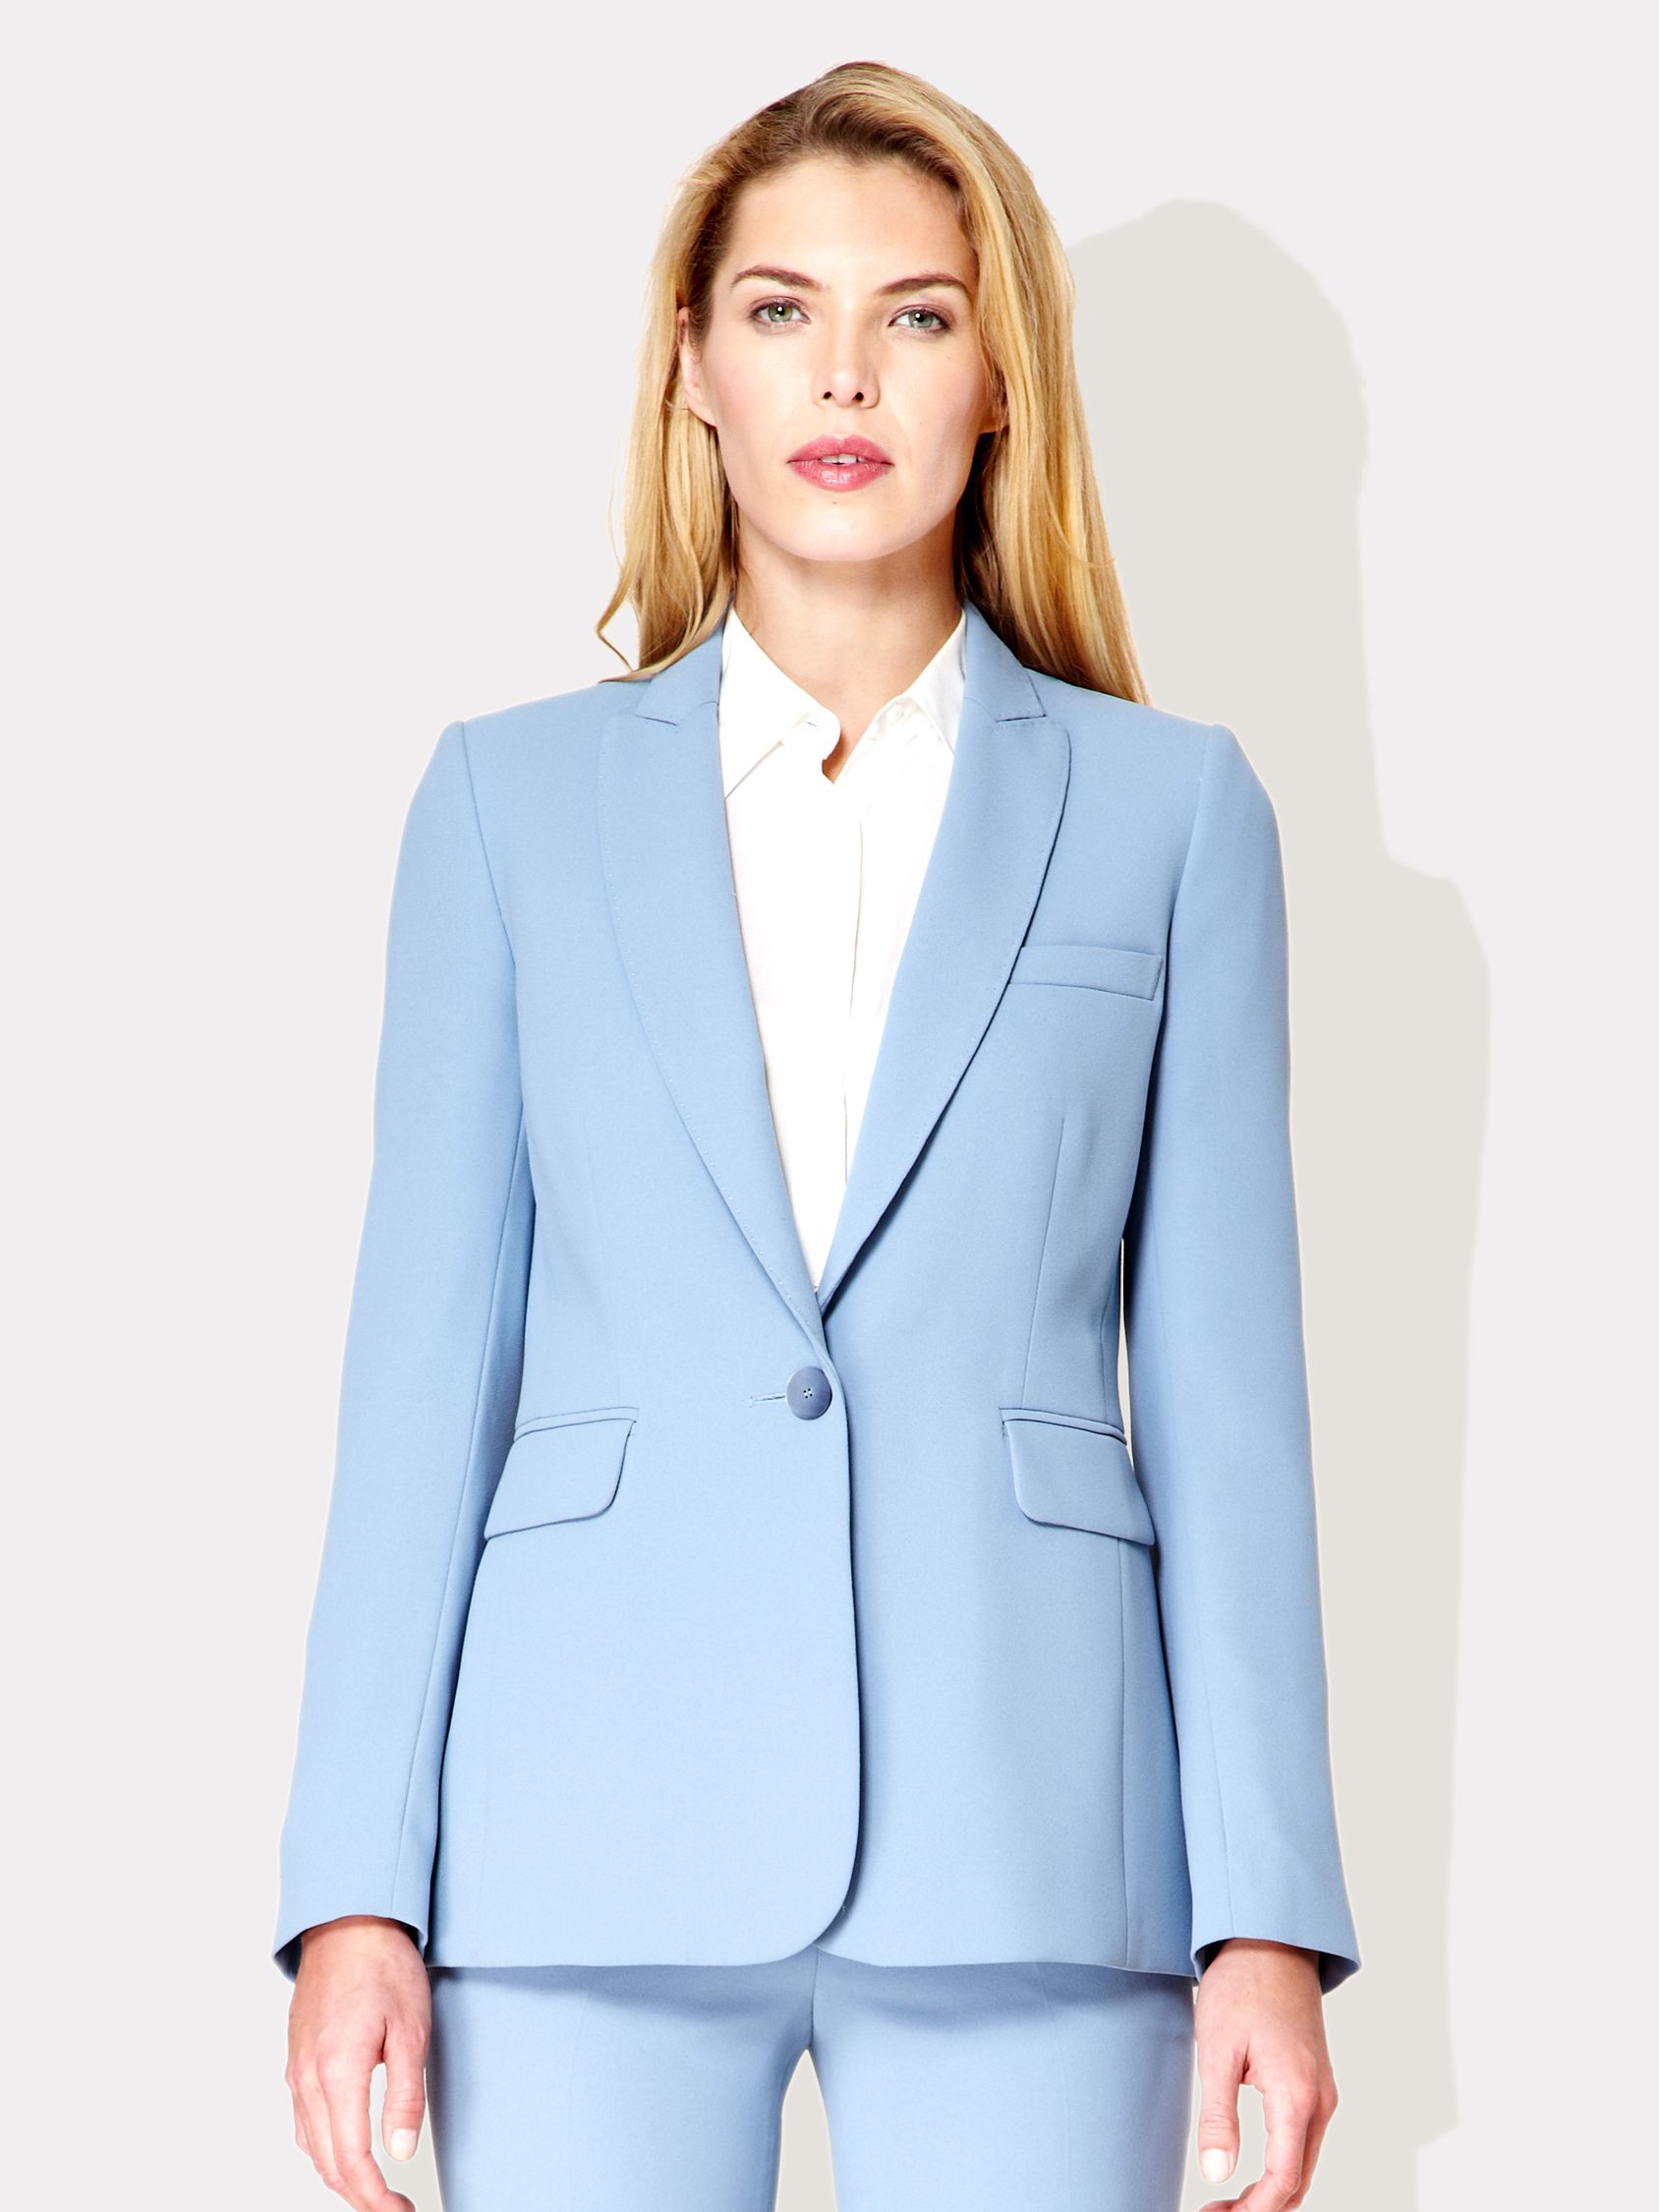 pale blue trouser suit ladies,Save up to 16%,www.ilcascinone.com